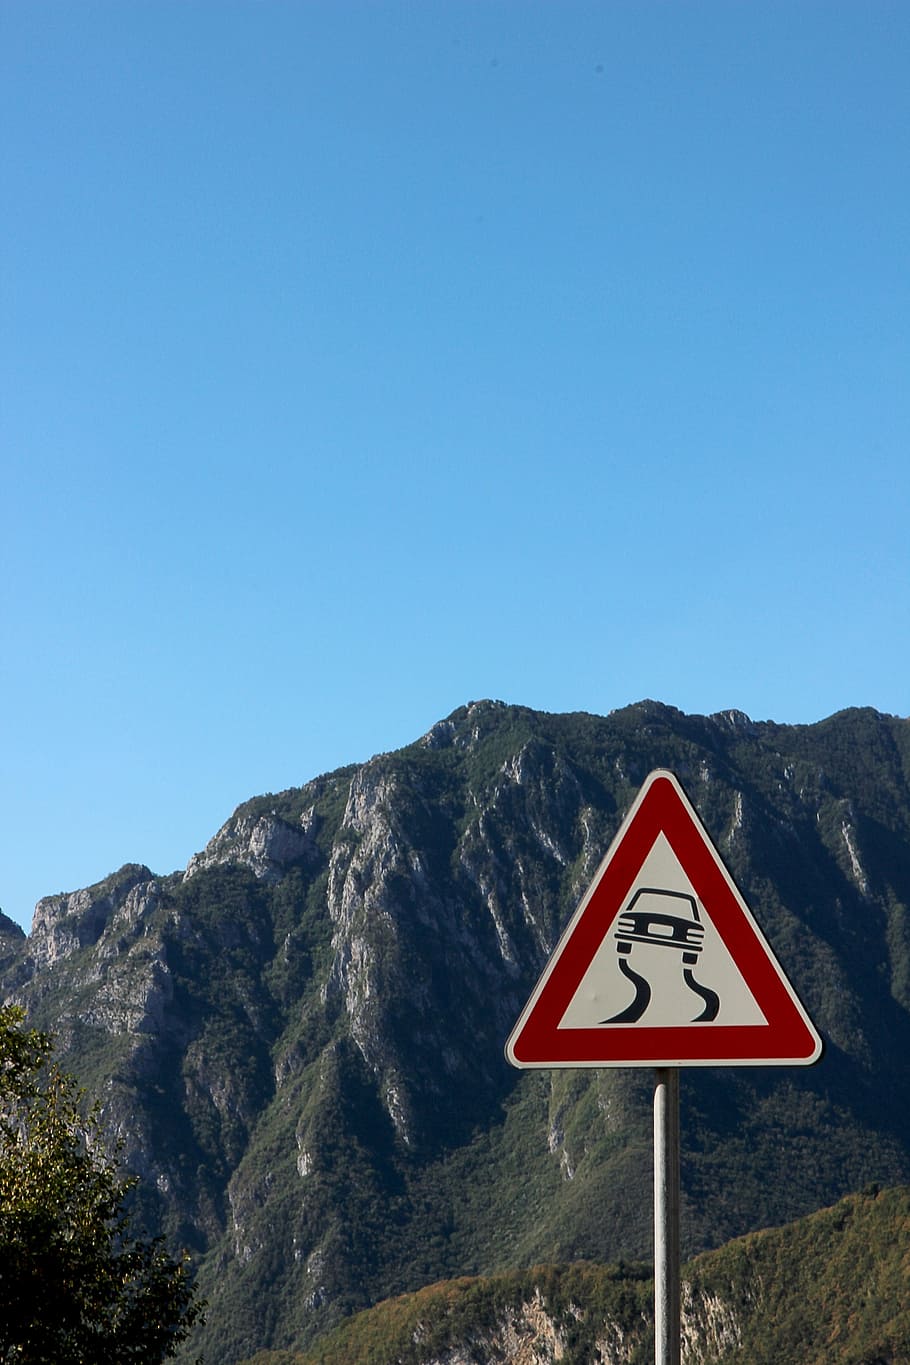 Road Sign, Attention, Fling, Street Sign, traffic sign, warning, auto, danger point, mountains, sign